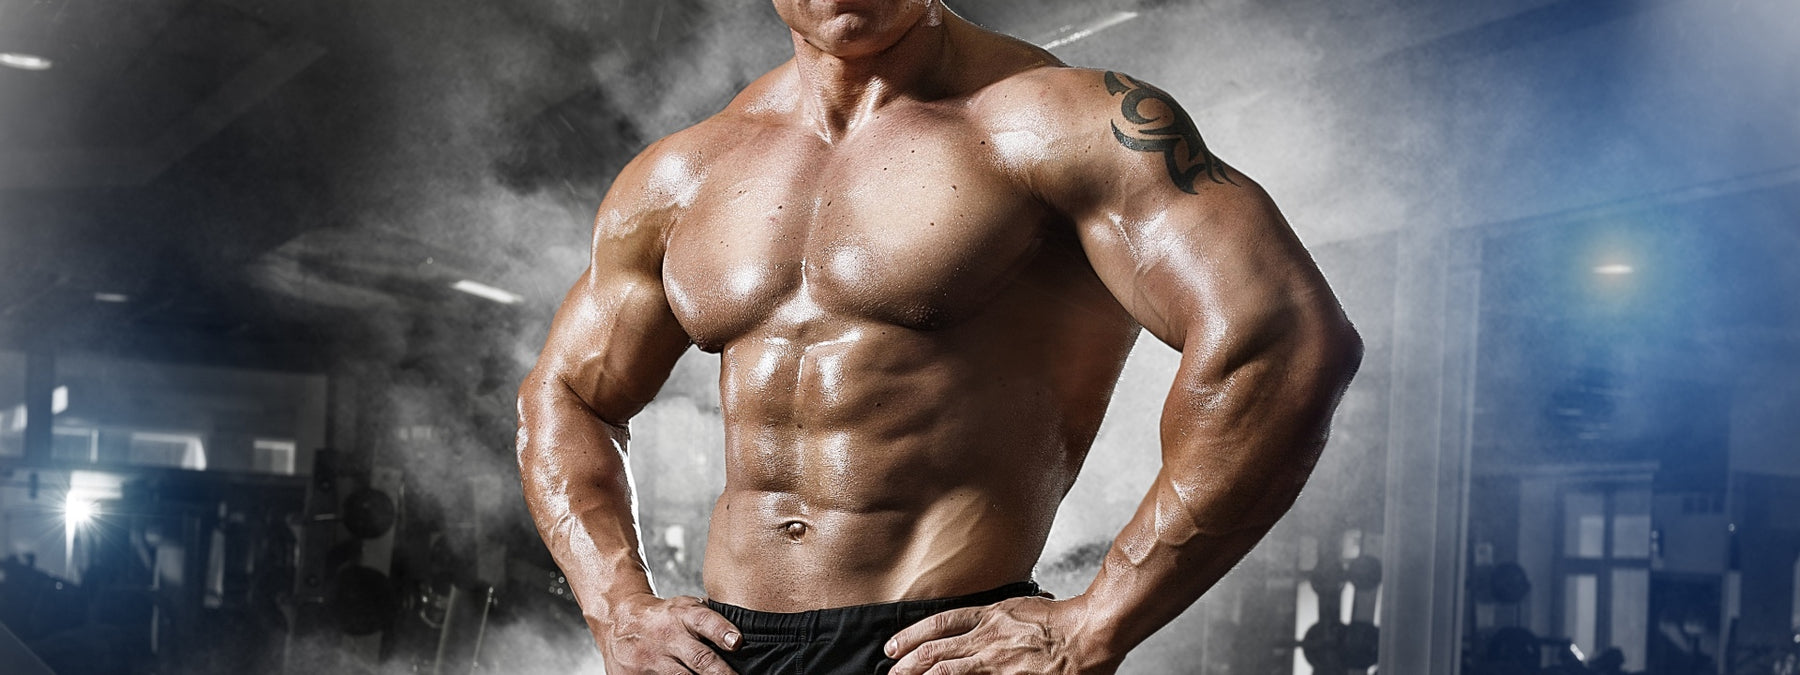 Muscle and Strength - The Ultimate Workout Routine to Build Both